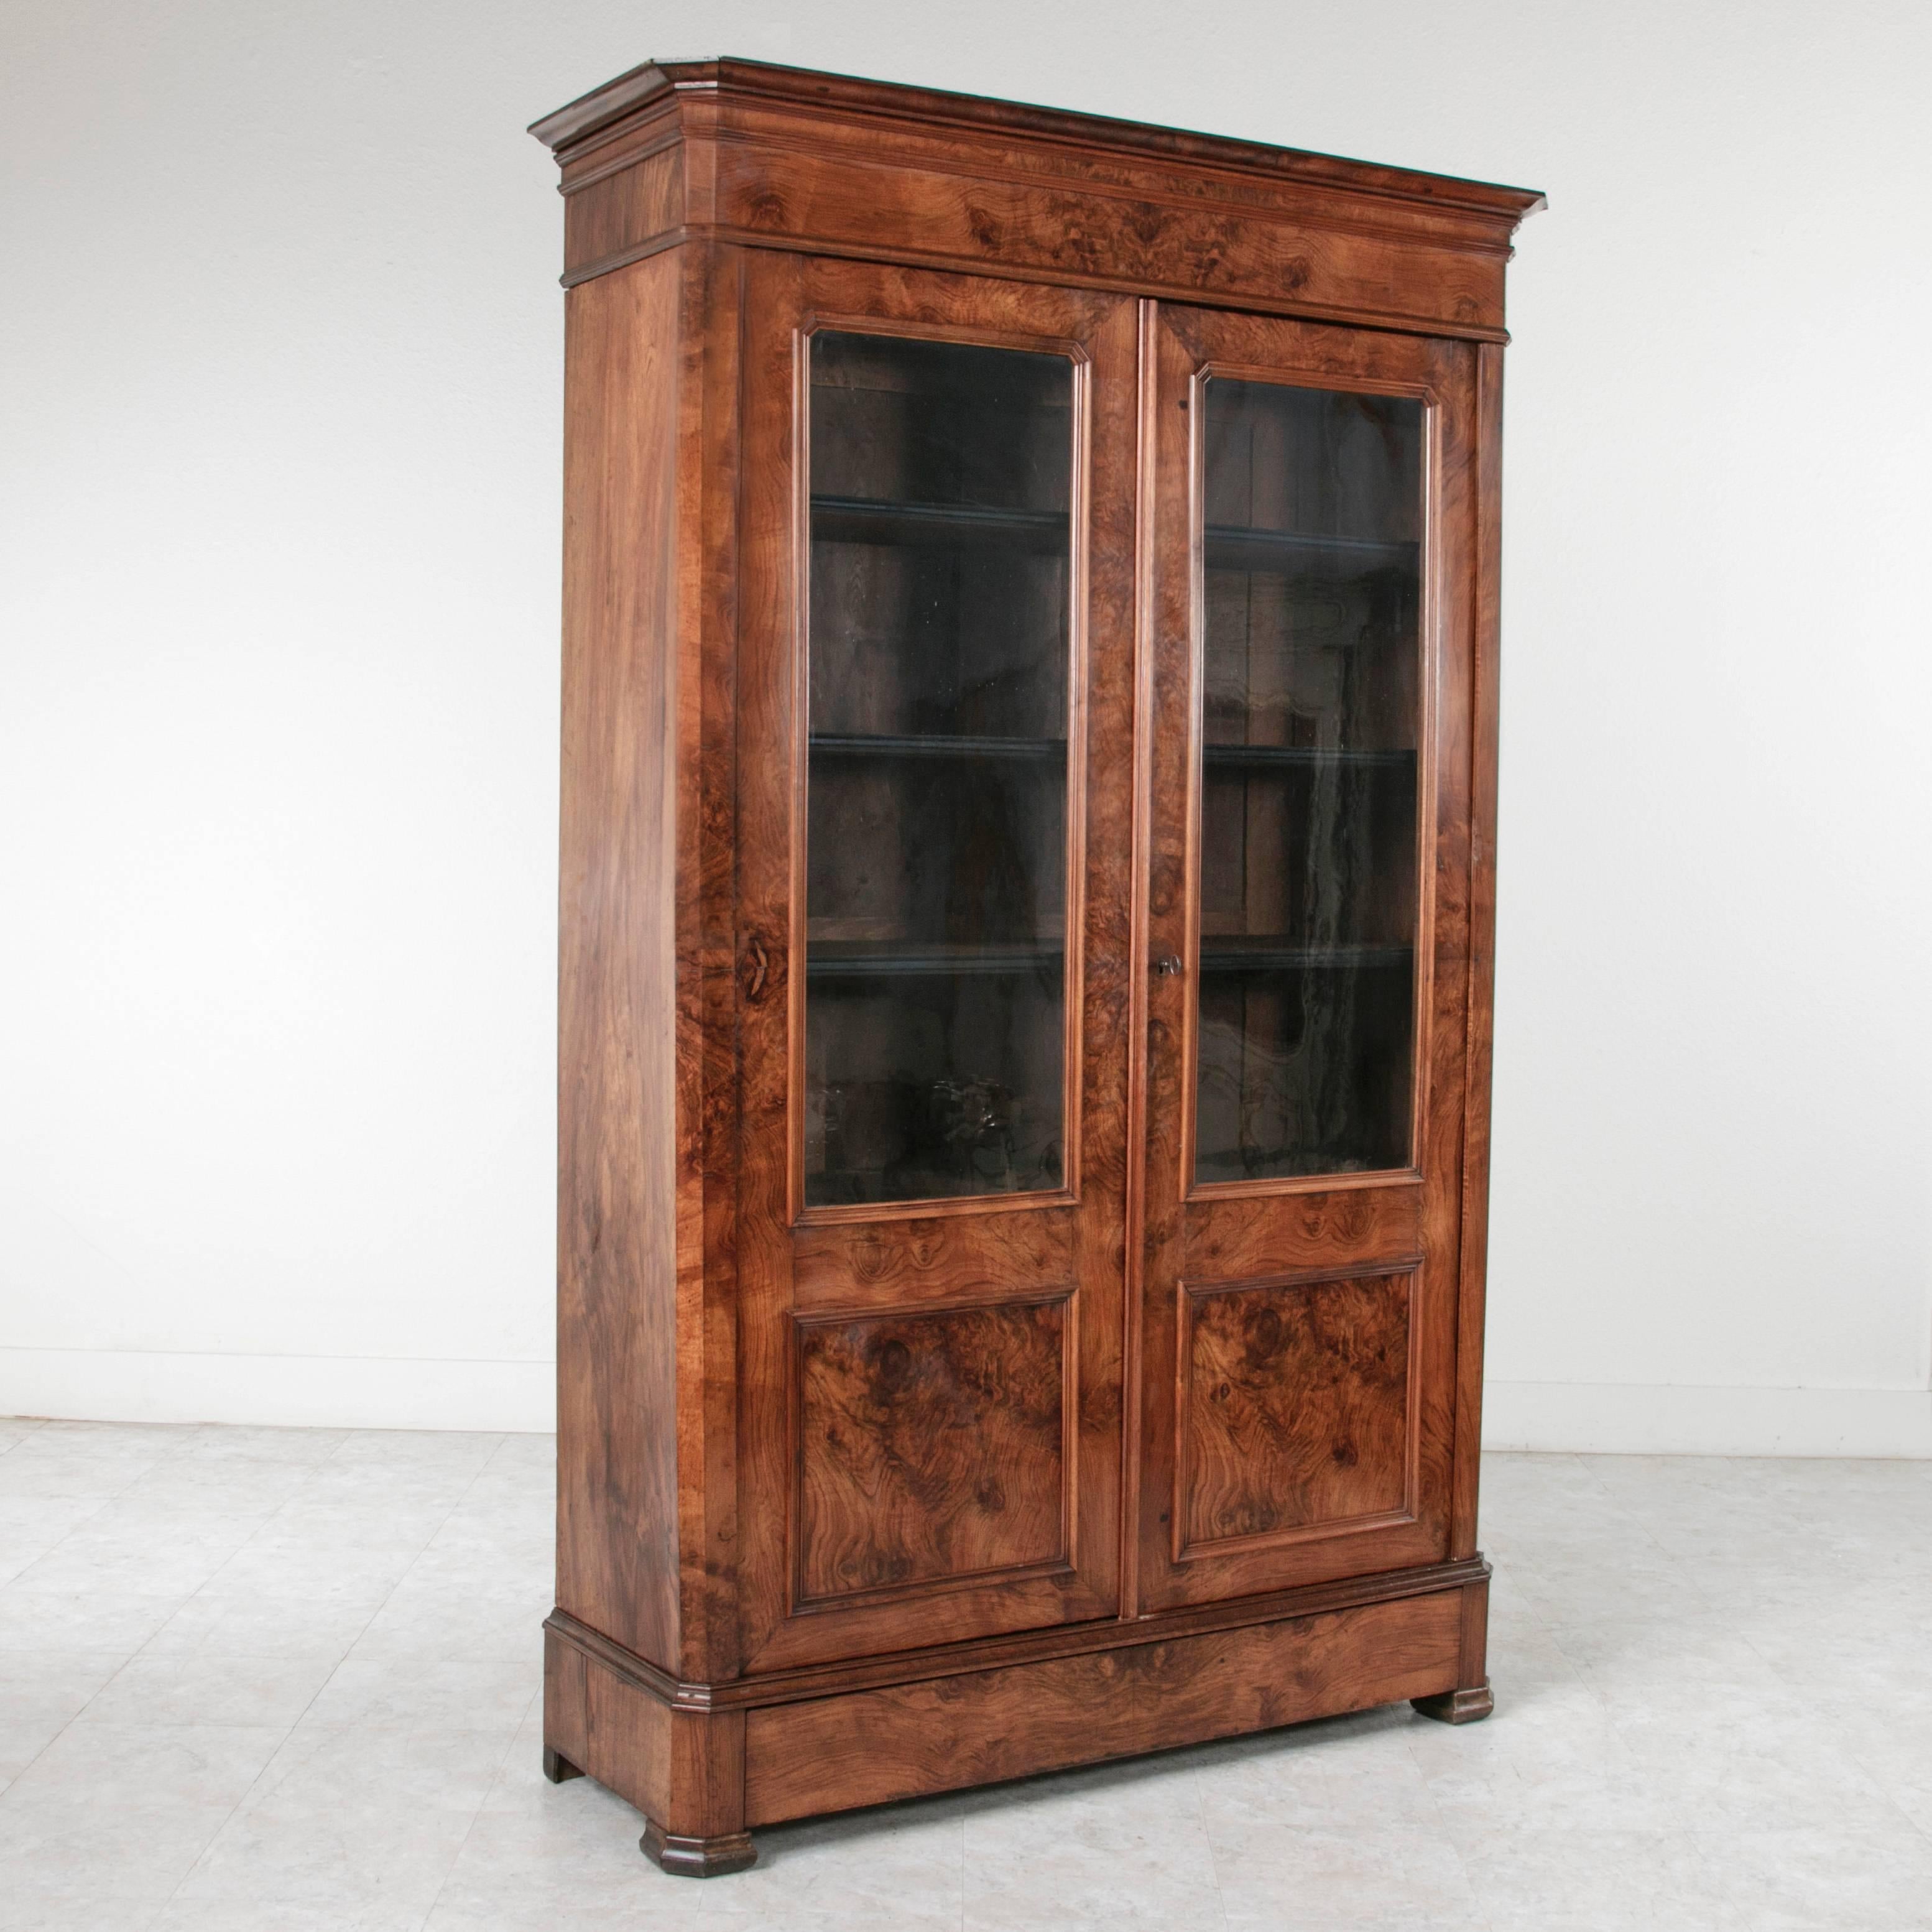 This exceptional bookmatched walnut Louis Philippe period bibliothèque features a hidden lower drawer and original handblown glass doors. The intricate burl of this piece continues up its smooth sides and is carried across the trim at the crown and